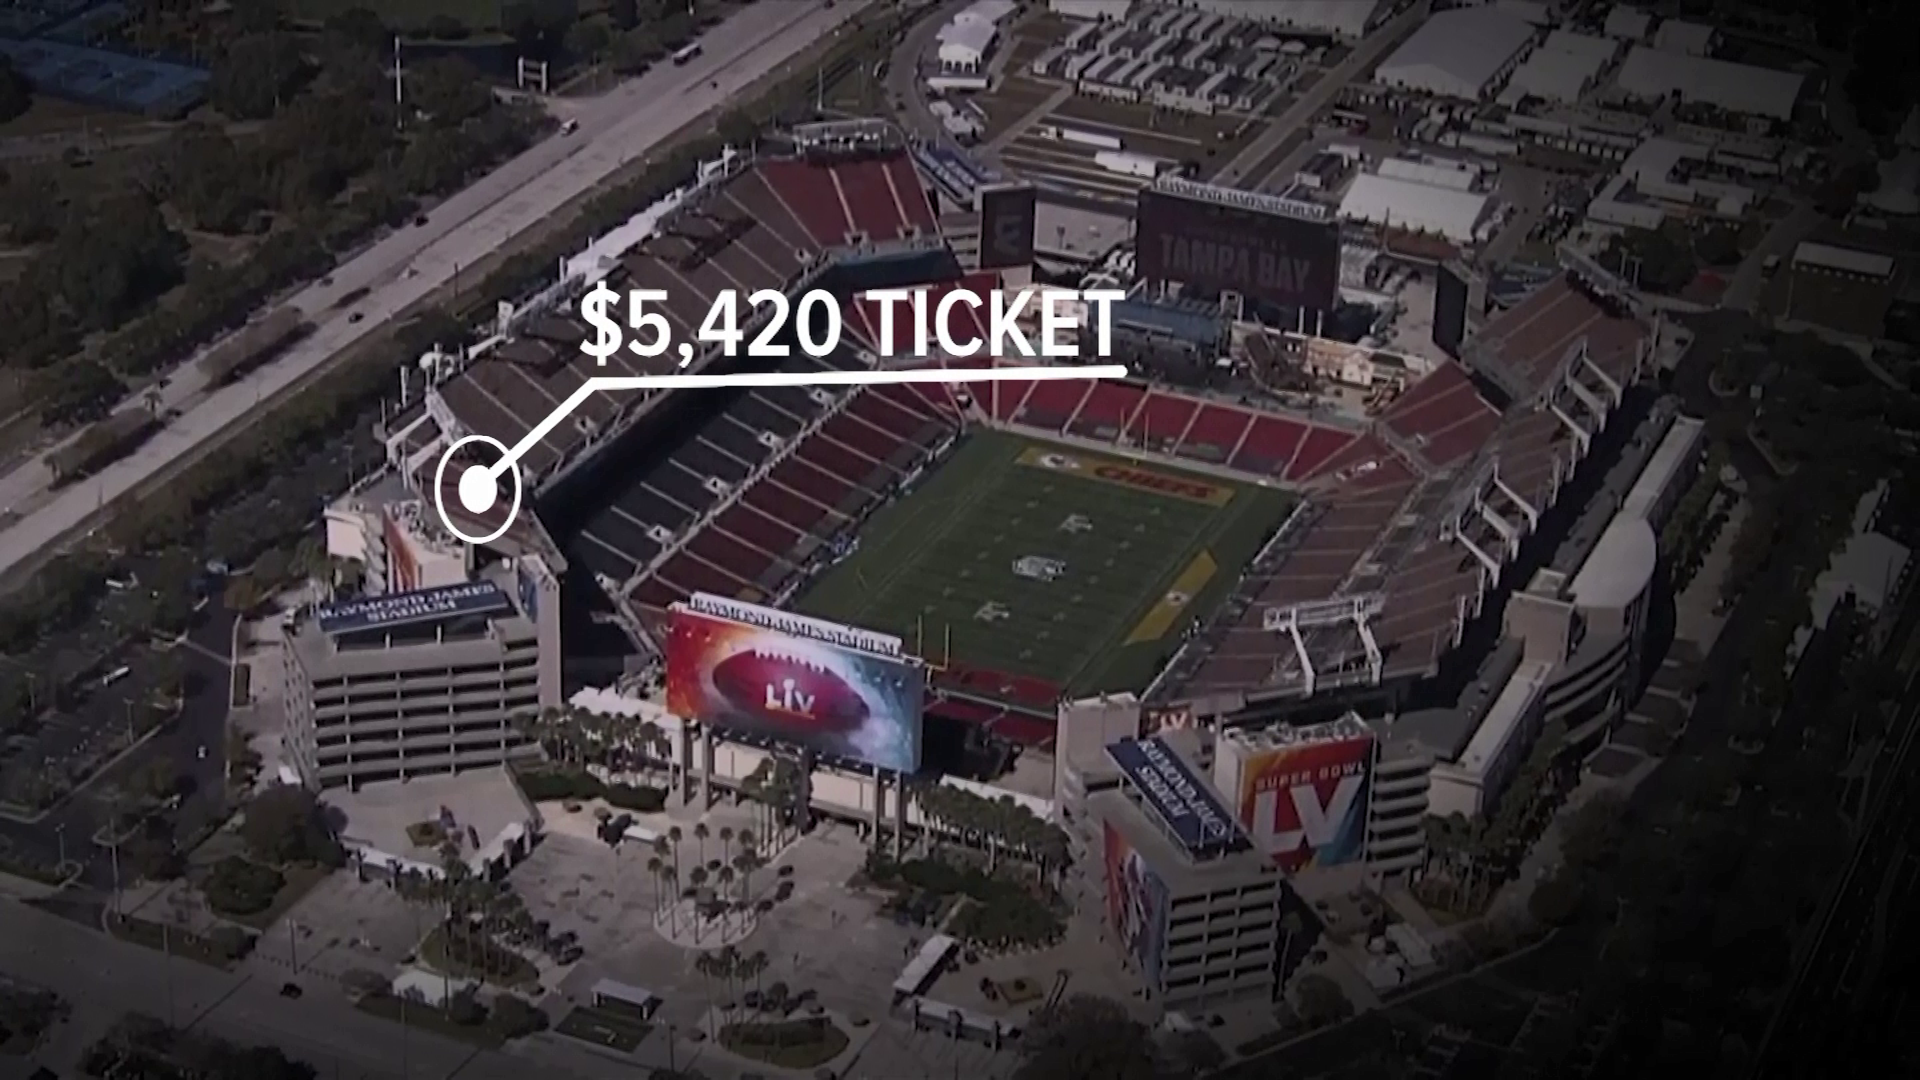 An average Super Bowl LVI ticket is $5,915 after prices fall